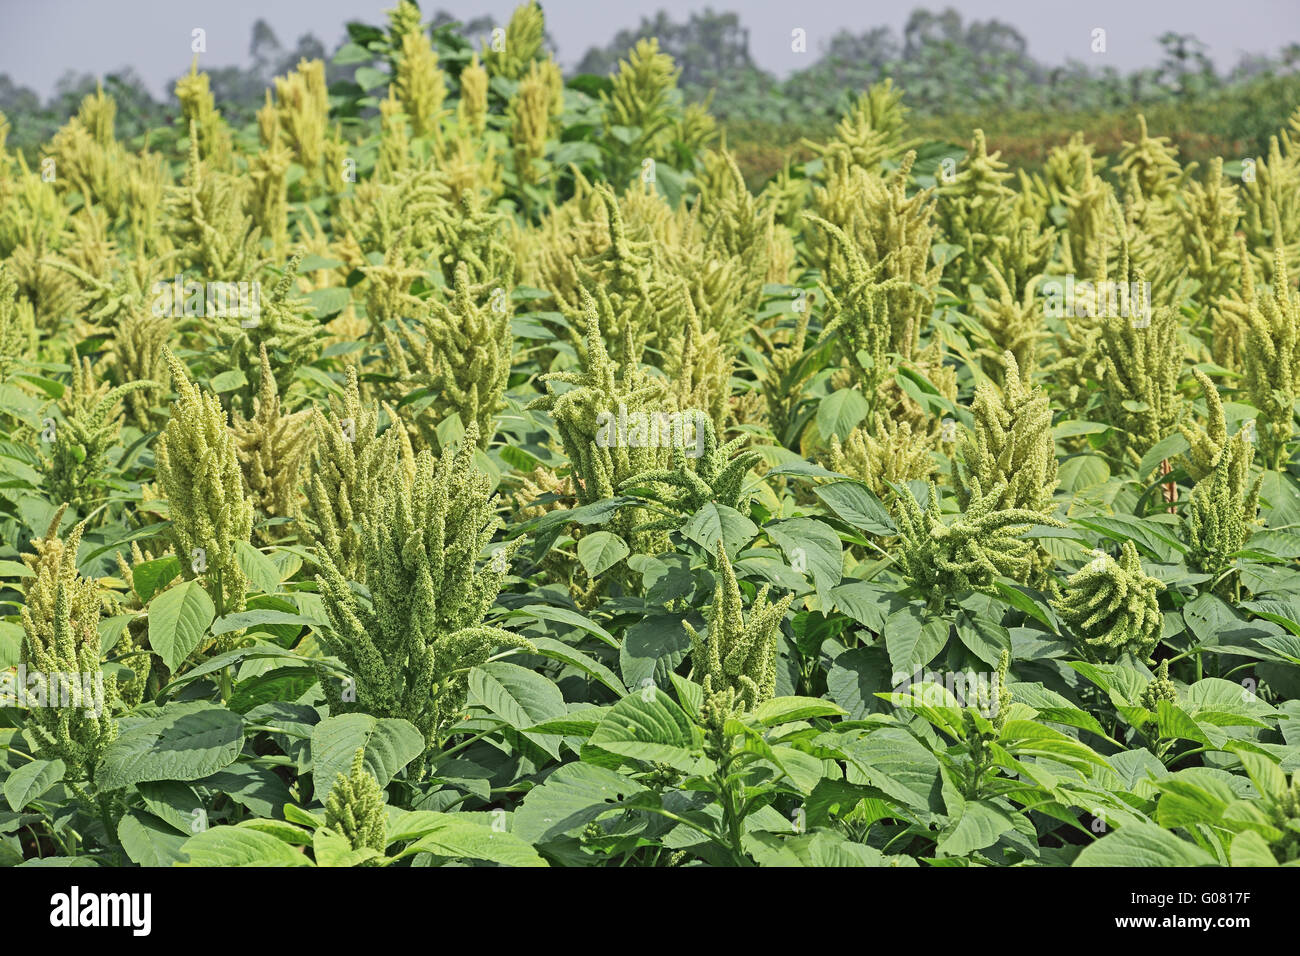 Indian Green Amaranth. Cultivated as leaf vegetables, cereals and ornamental plants. Genus is Amaranthus. Stock Photo